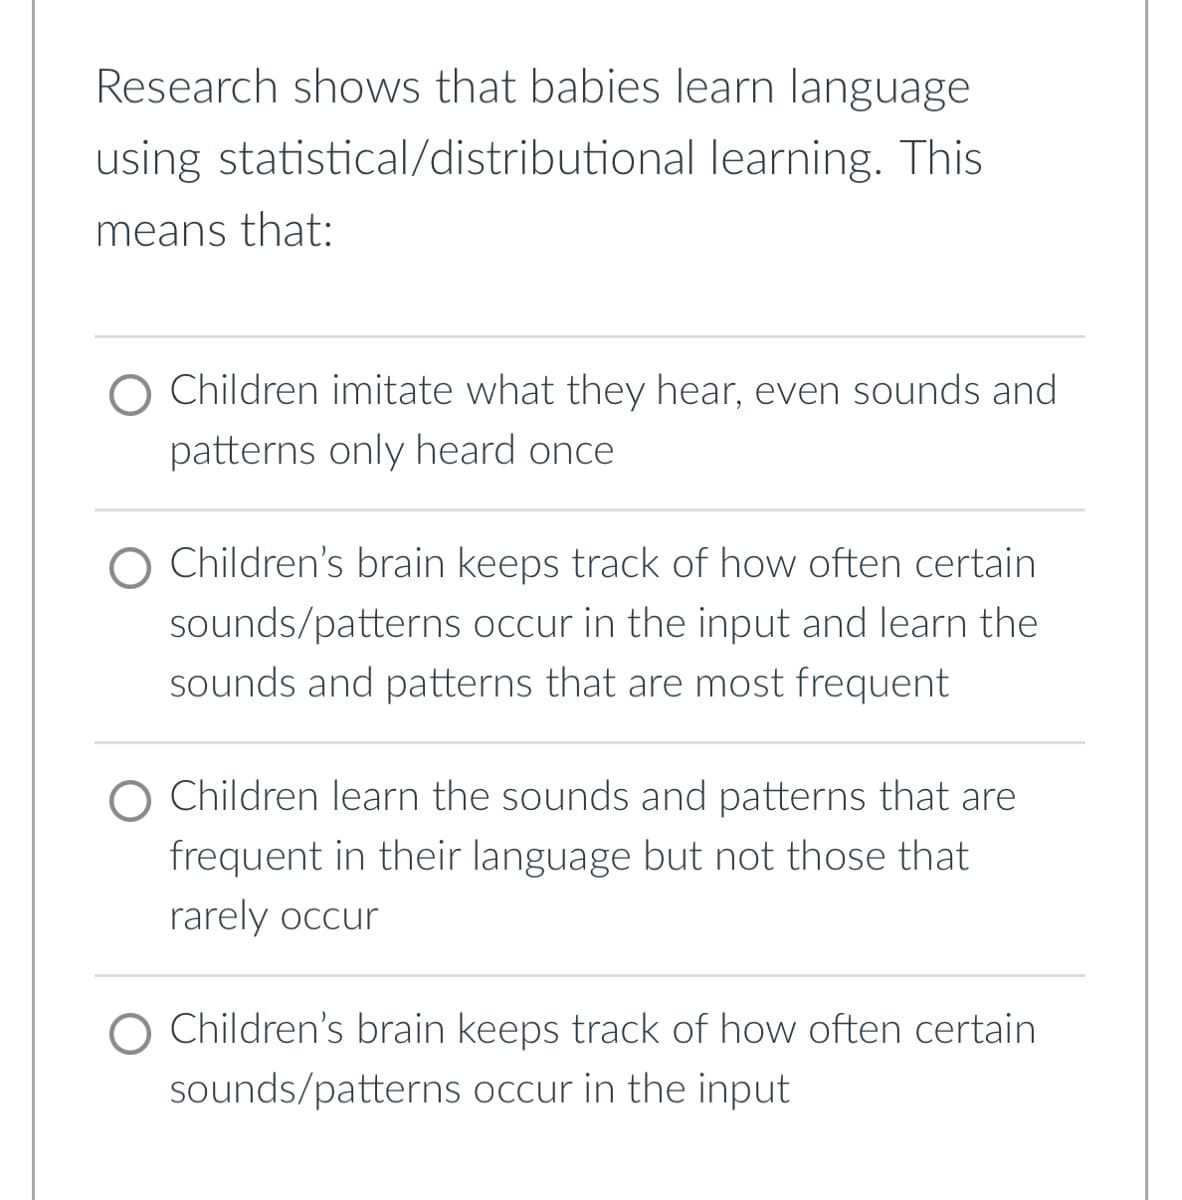 Research shows that babies learn language
using statistical/distributional
learning. This
means that:
Children imitate what they hear, even sounds and
patterns only heard once
O Children's brain keeps track of how often certain
sounds/patterns occur in the input and learn the
sounds and patterns that are most frequent
Children learn the sounds and patterns that are
frequent in their language but not those that
rarely occur
Children's brain keeps track of how often certain
sounds/patterns occur in the input